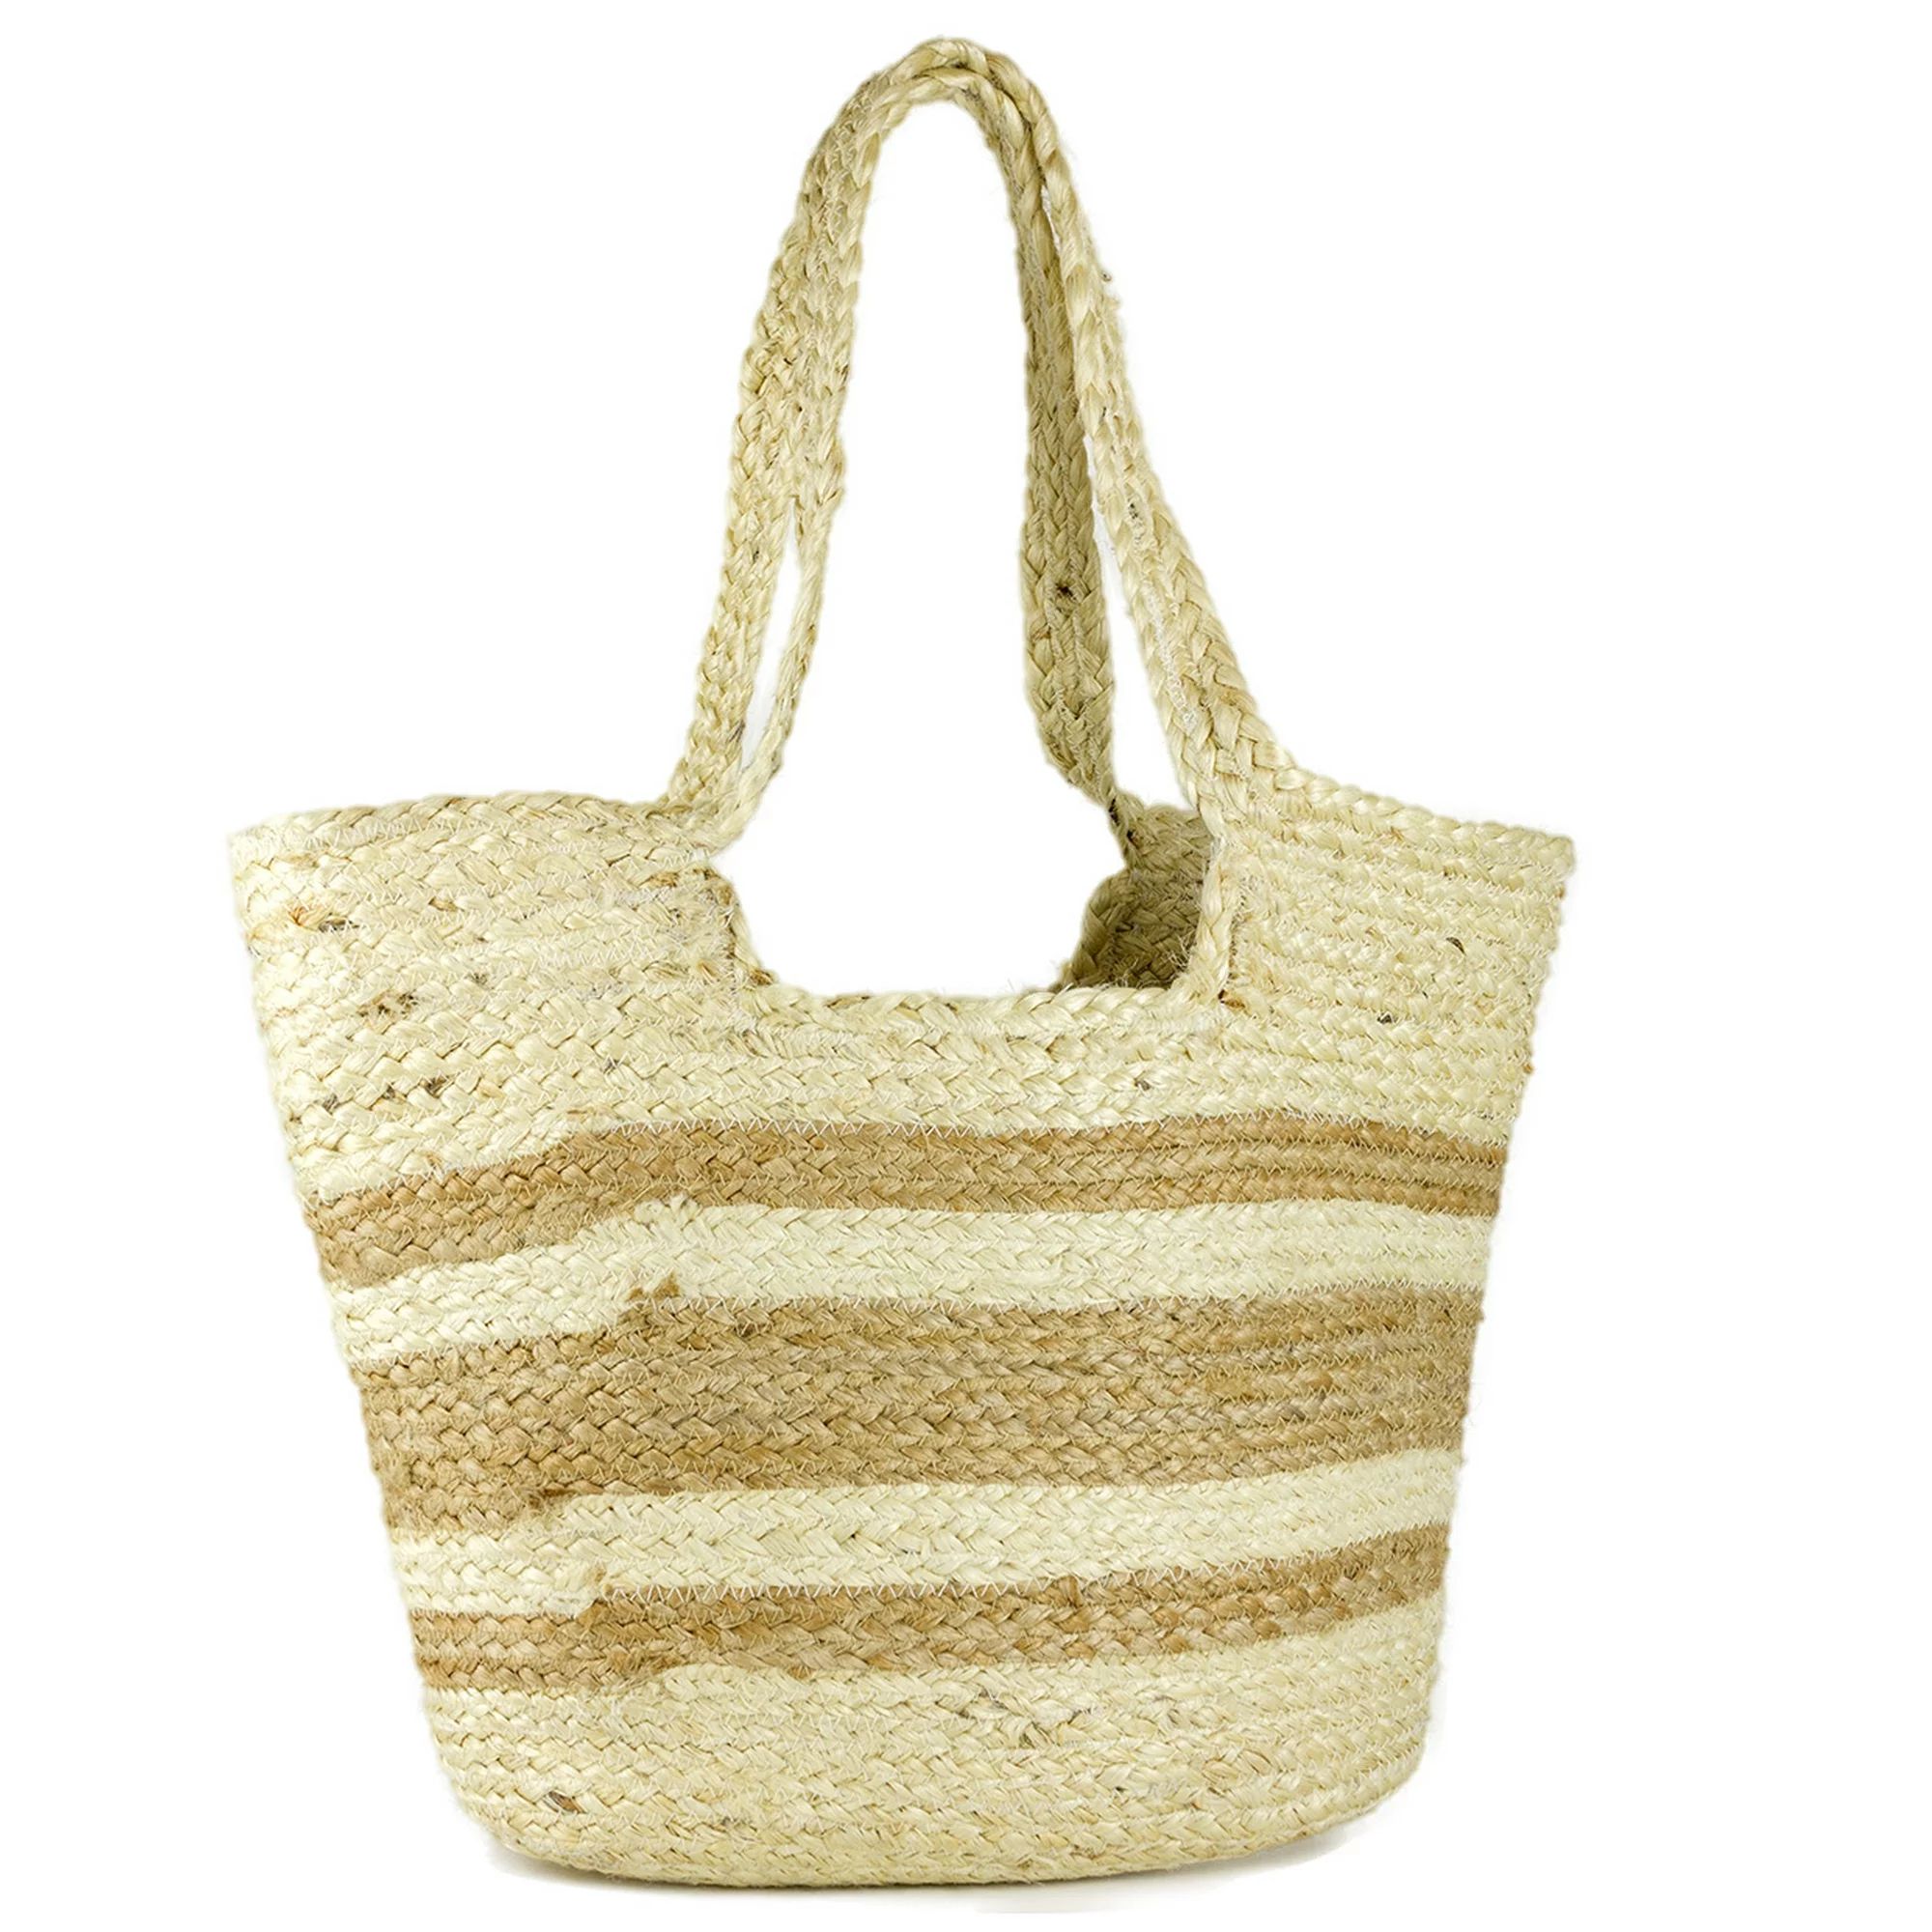 Women's Striped Woven Jute Beach Tote Bag with Double Handle | Walmart (US)